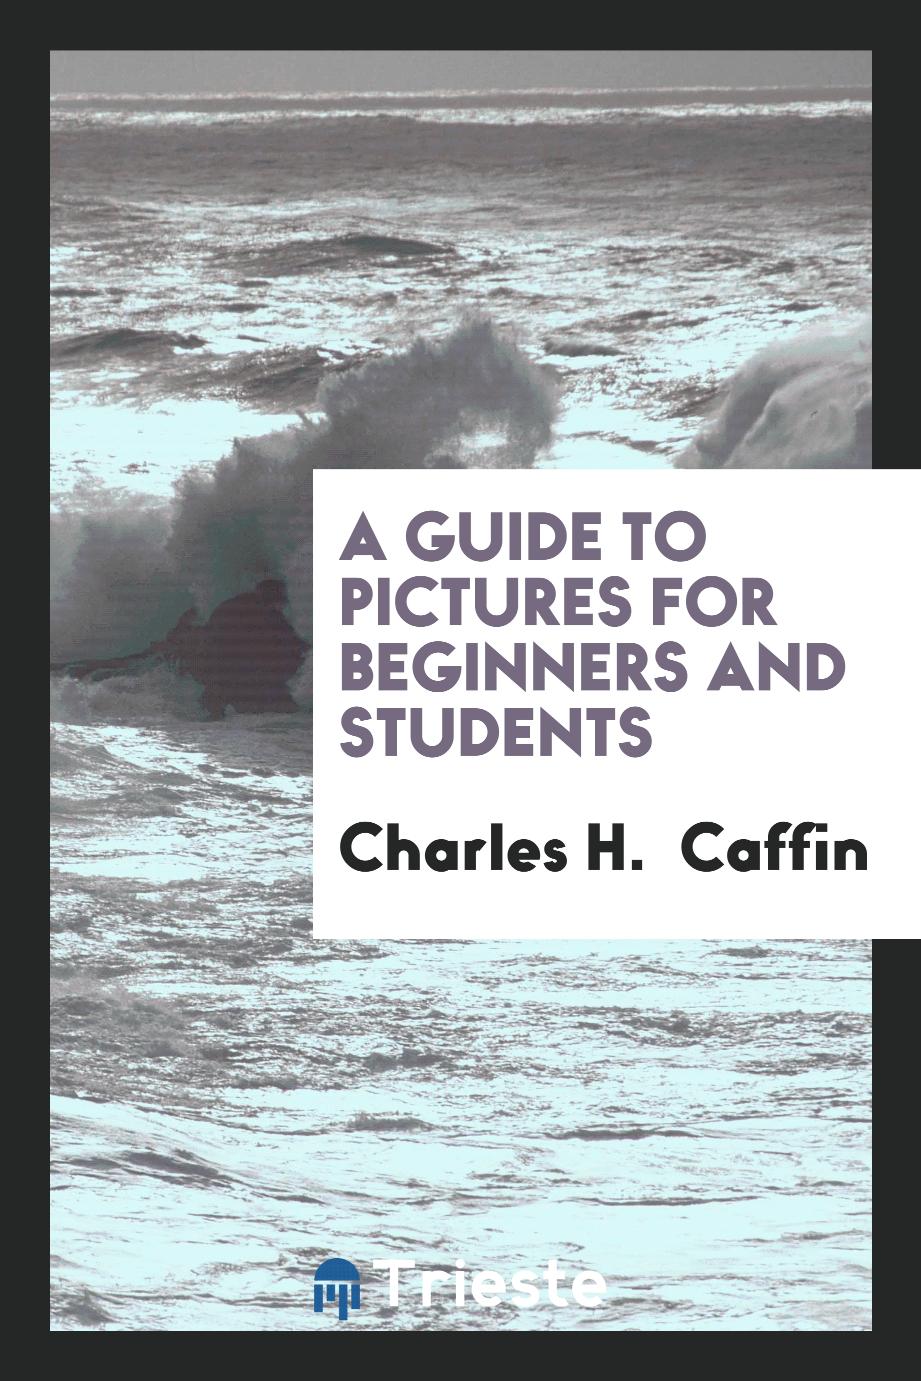 Charles H. Caffin - A Guide to Pictures for Beginners and Students